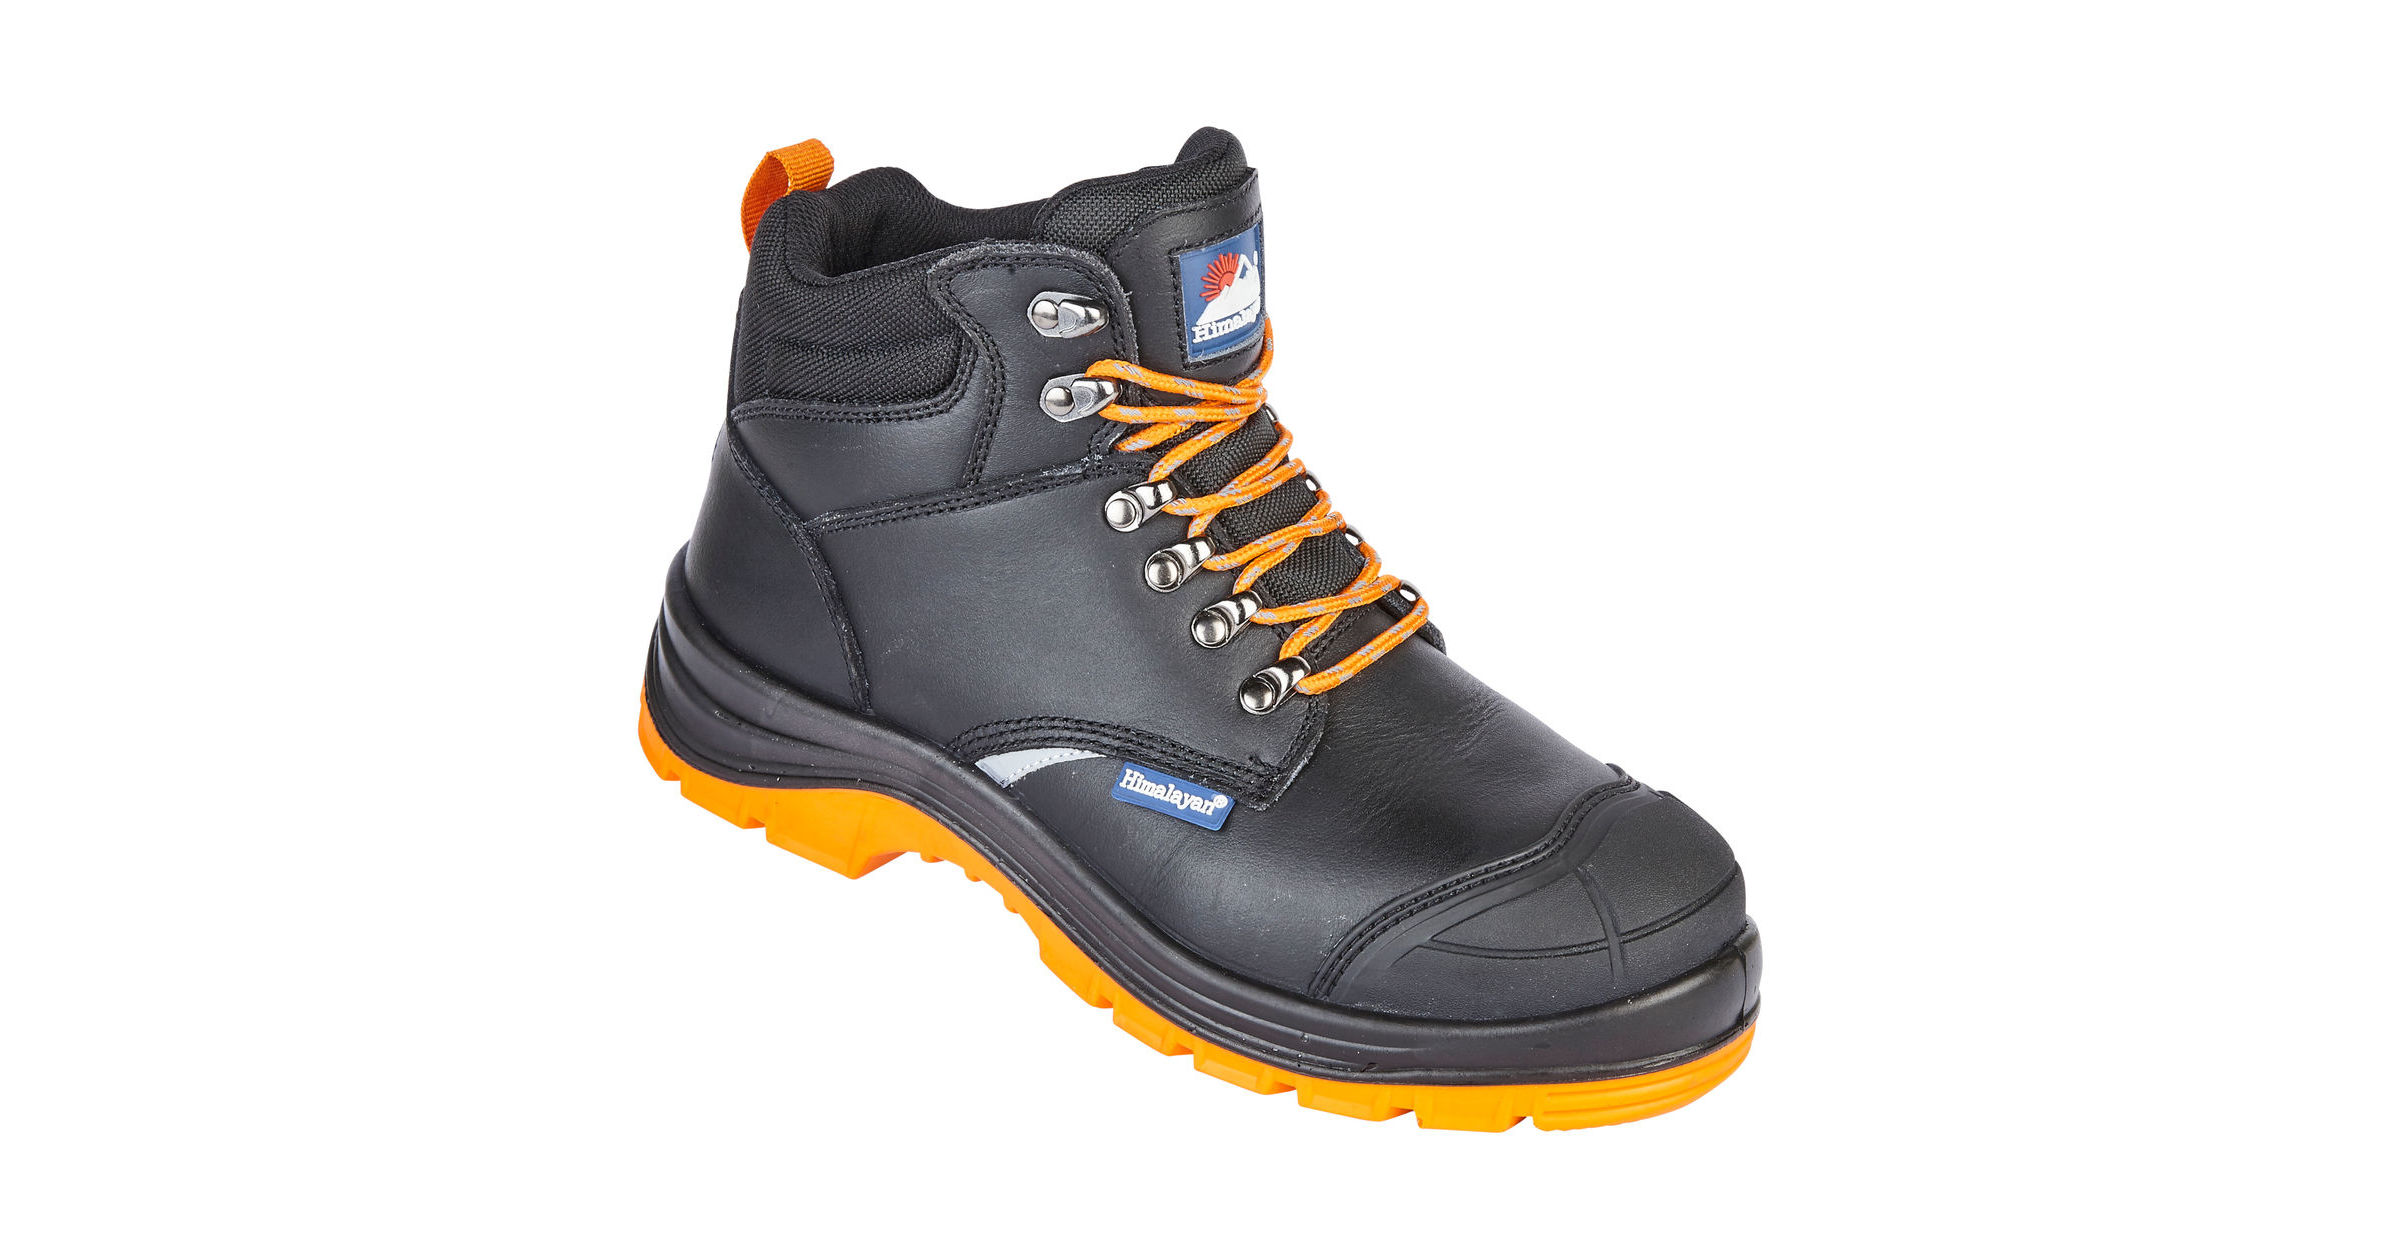 HIMALAYAN 5401 Reflecto S3 black steel toe safety boot with midsole & scuff-cap 